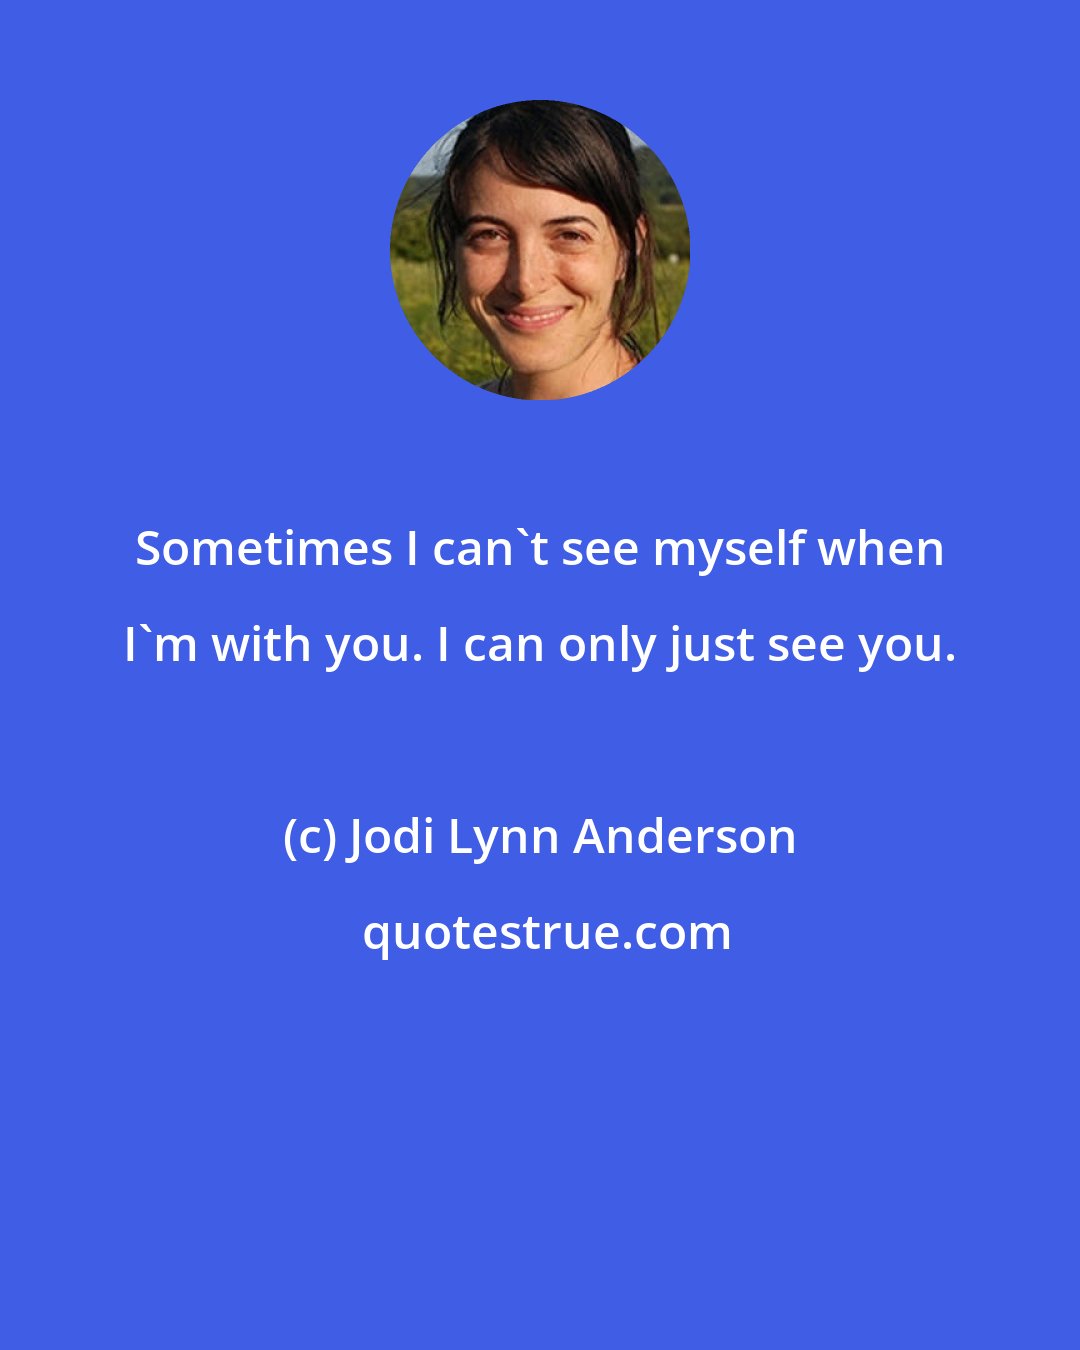 Jodi Lynn Anderson: Sometimes I can't see myself when I'm with you. I can only just see you.